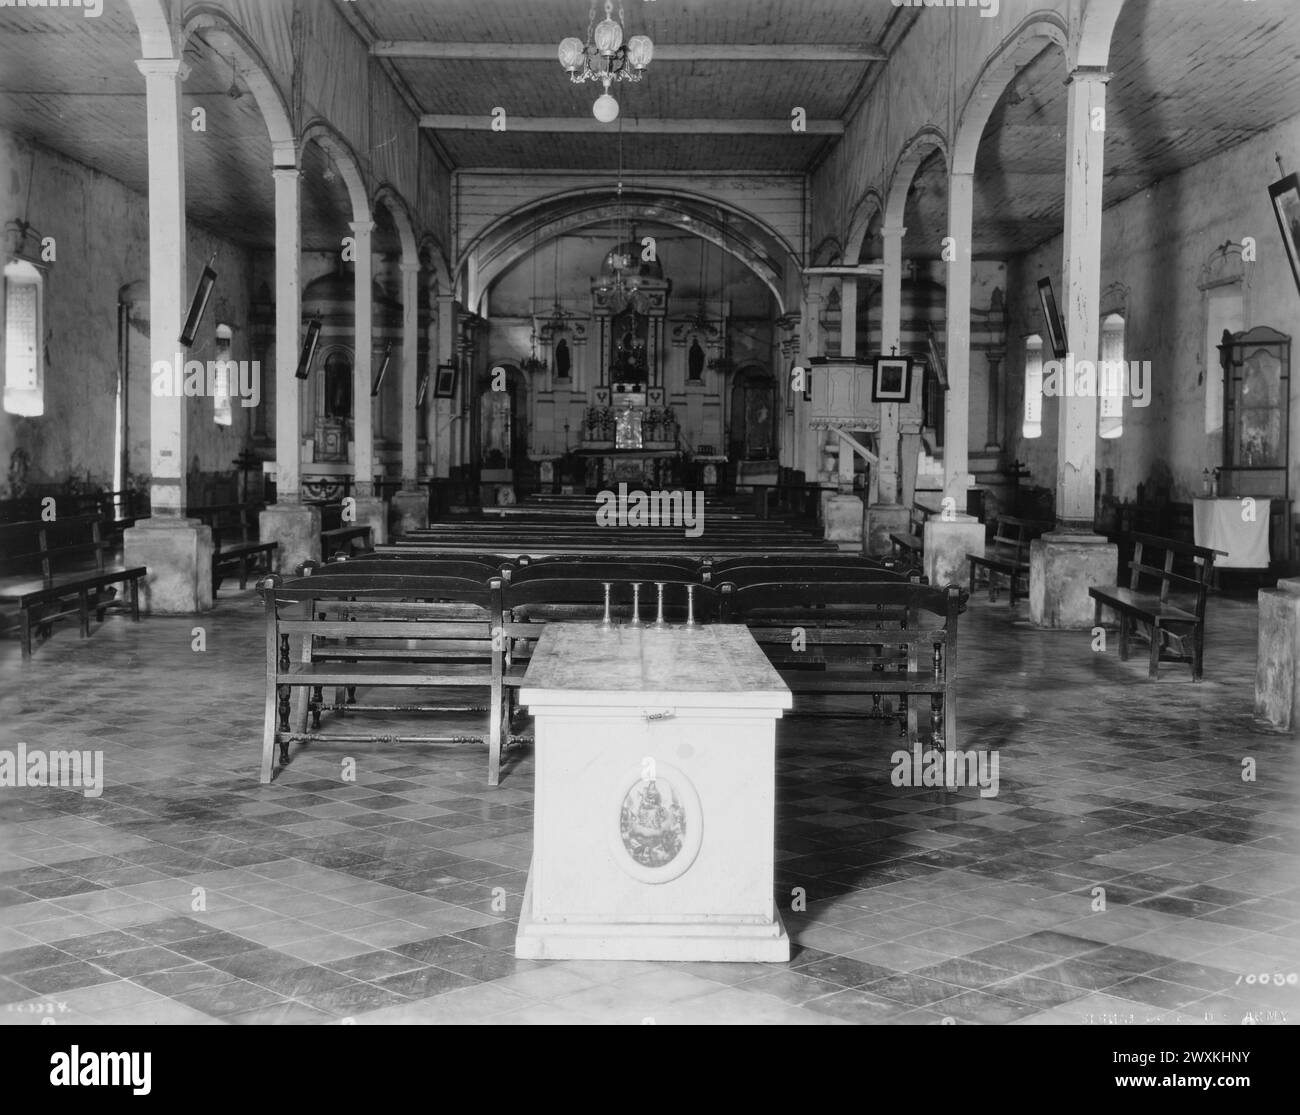 Original caption: Taken at the Barasoain Church, Malolos, Province of Bulacan, P.I. (Padre Carlos Inquimboy (secular) Parish Priest). The Barasoain Church (now restored to religious uses) holds a prominent place int eh historical annals of the Filipino people. It was in this church that the Delegates to the first Assembly of Representatives passed the Constitucion Politica de la Republica Filipina: sanctioned on Jan. 21, 1898 ca. 1929 Stock Photo